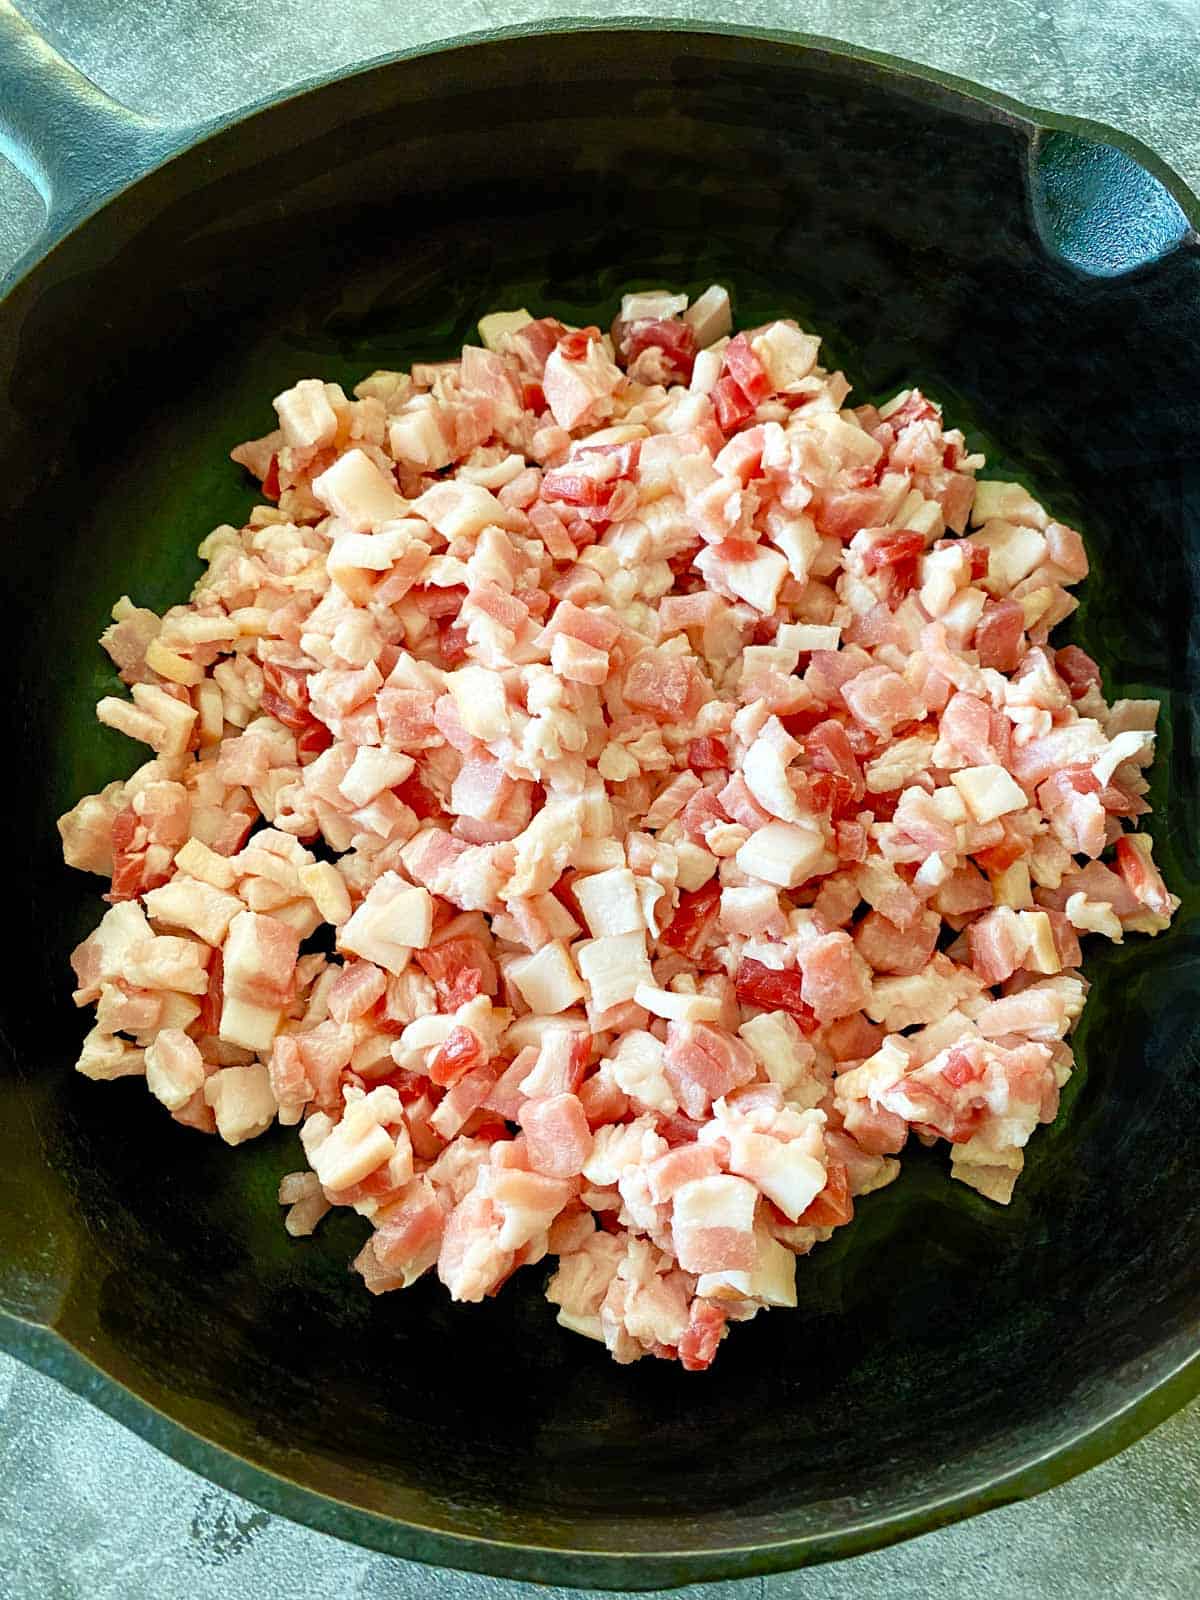 Finely chopped raw bacon in a cast iron skillet ready to be cooked.